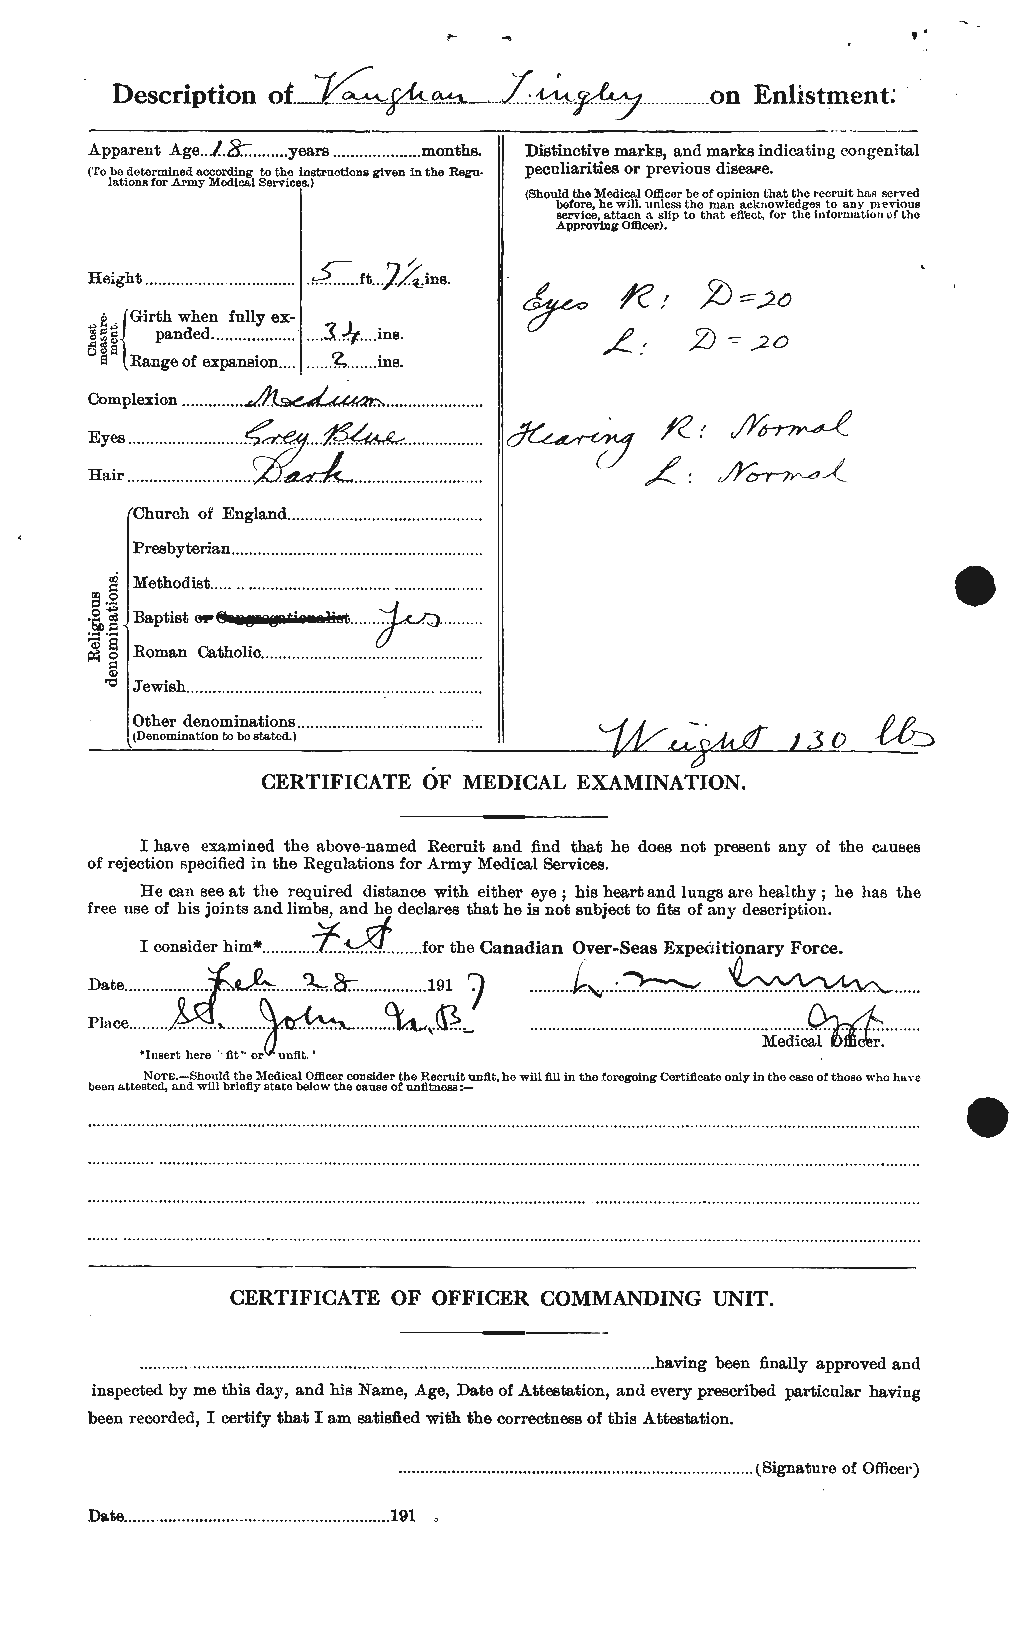 Personnel Records of the First World War - CEF 634636b